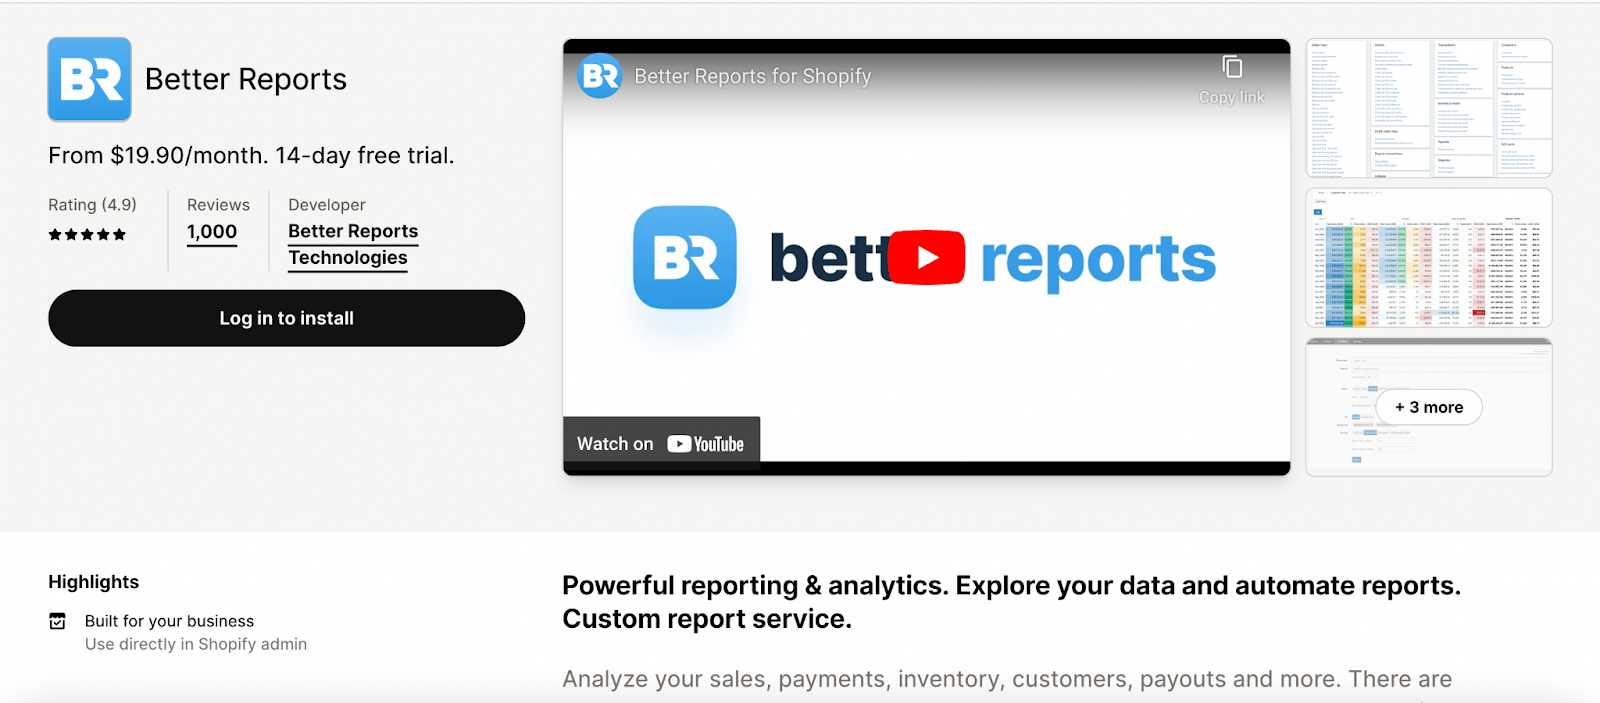 Better Reports